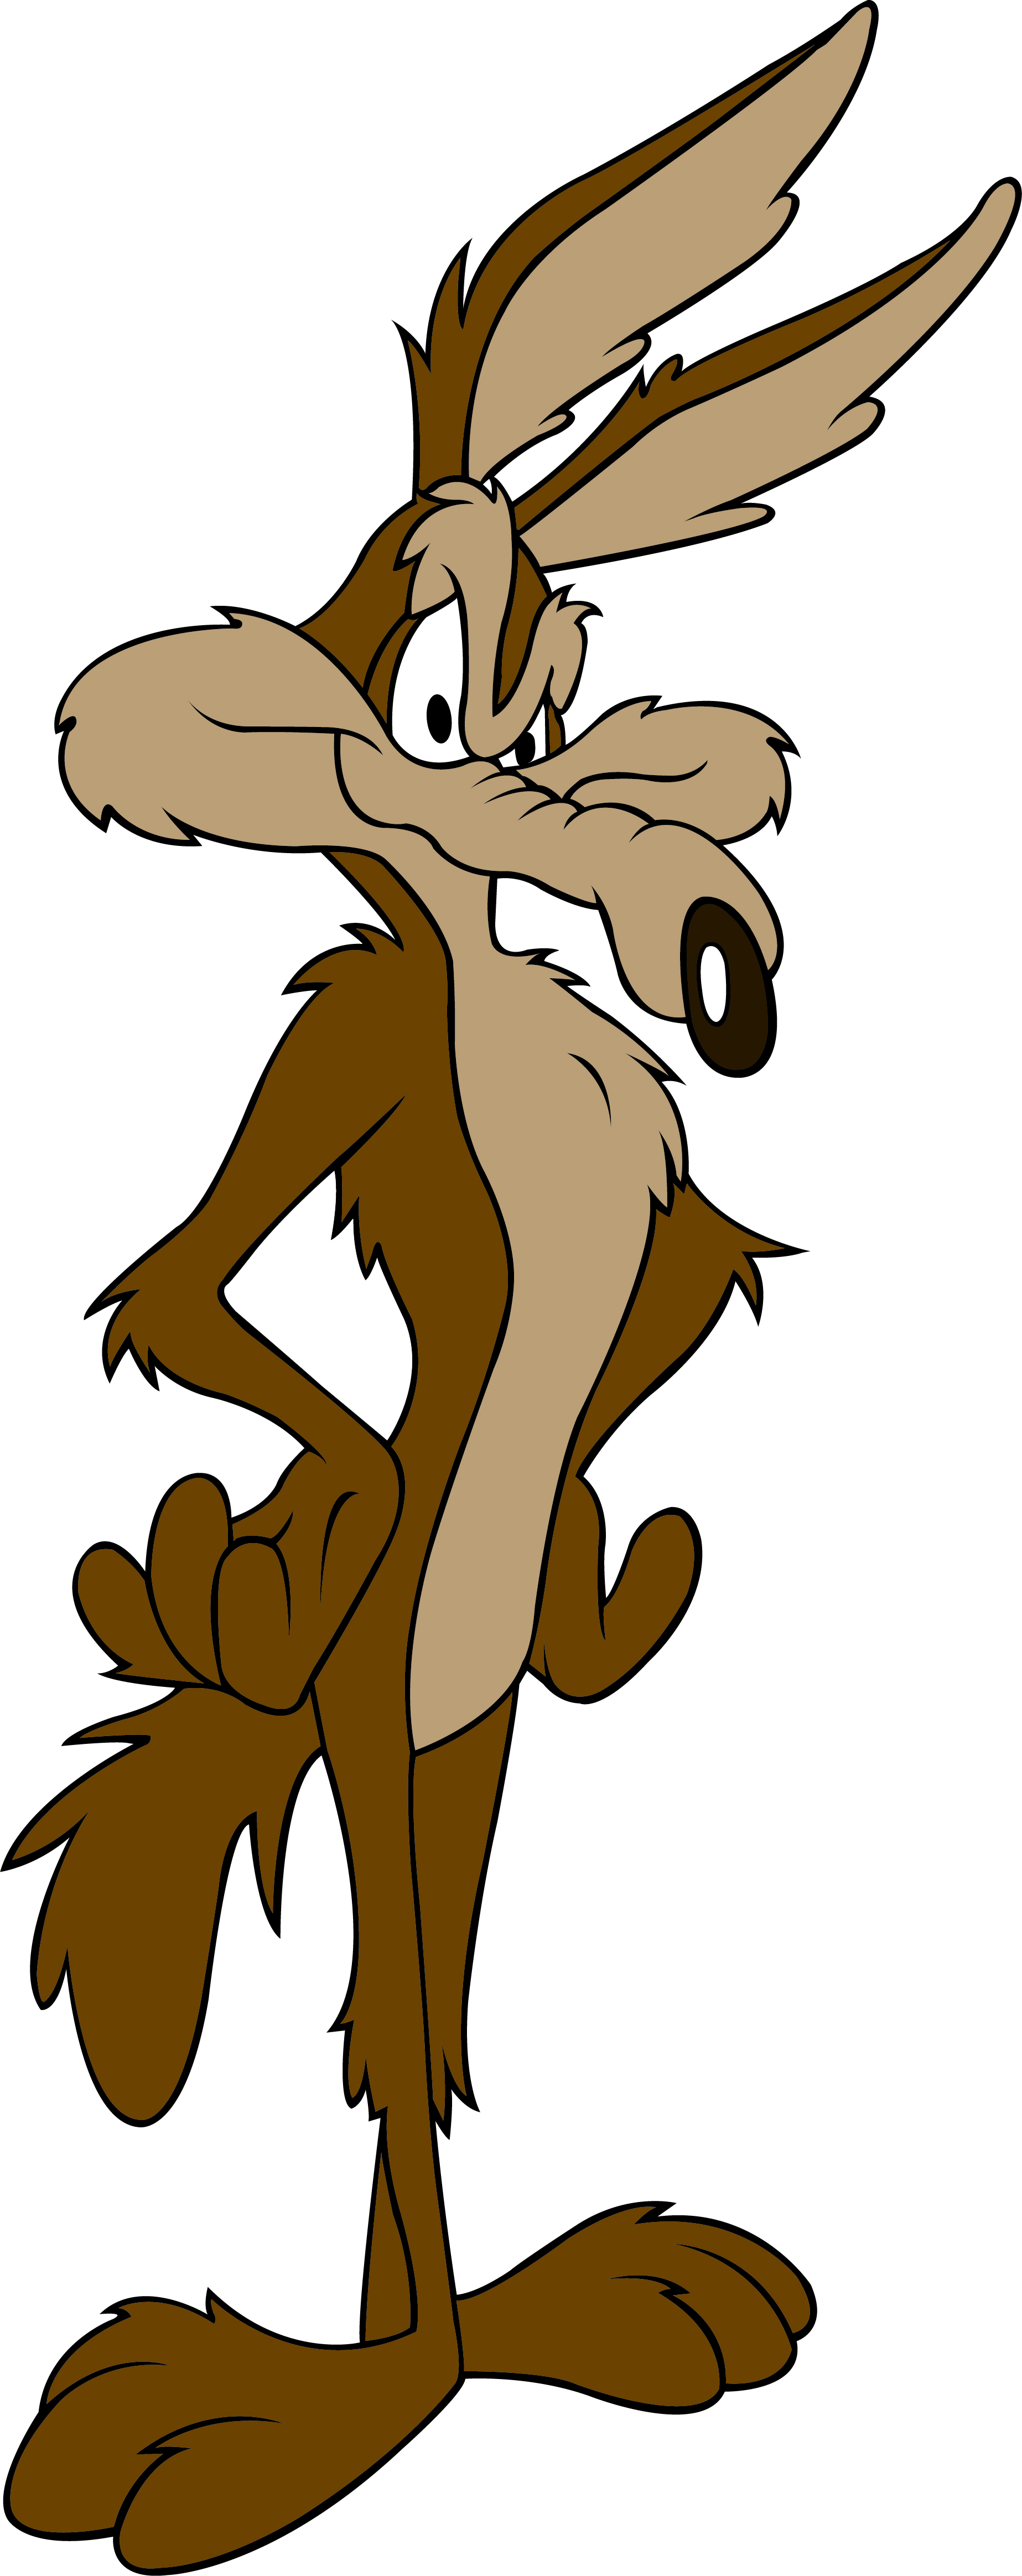 Looney Tunes Wile E Coyote HD Wallpaper General